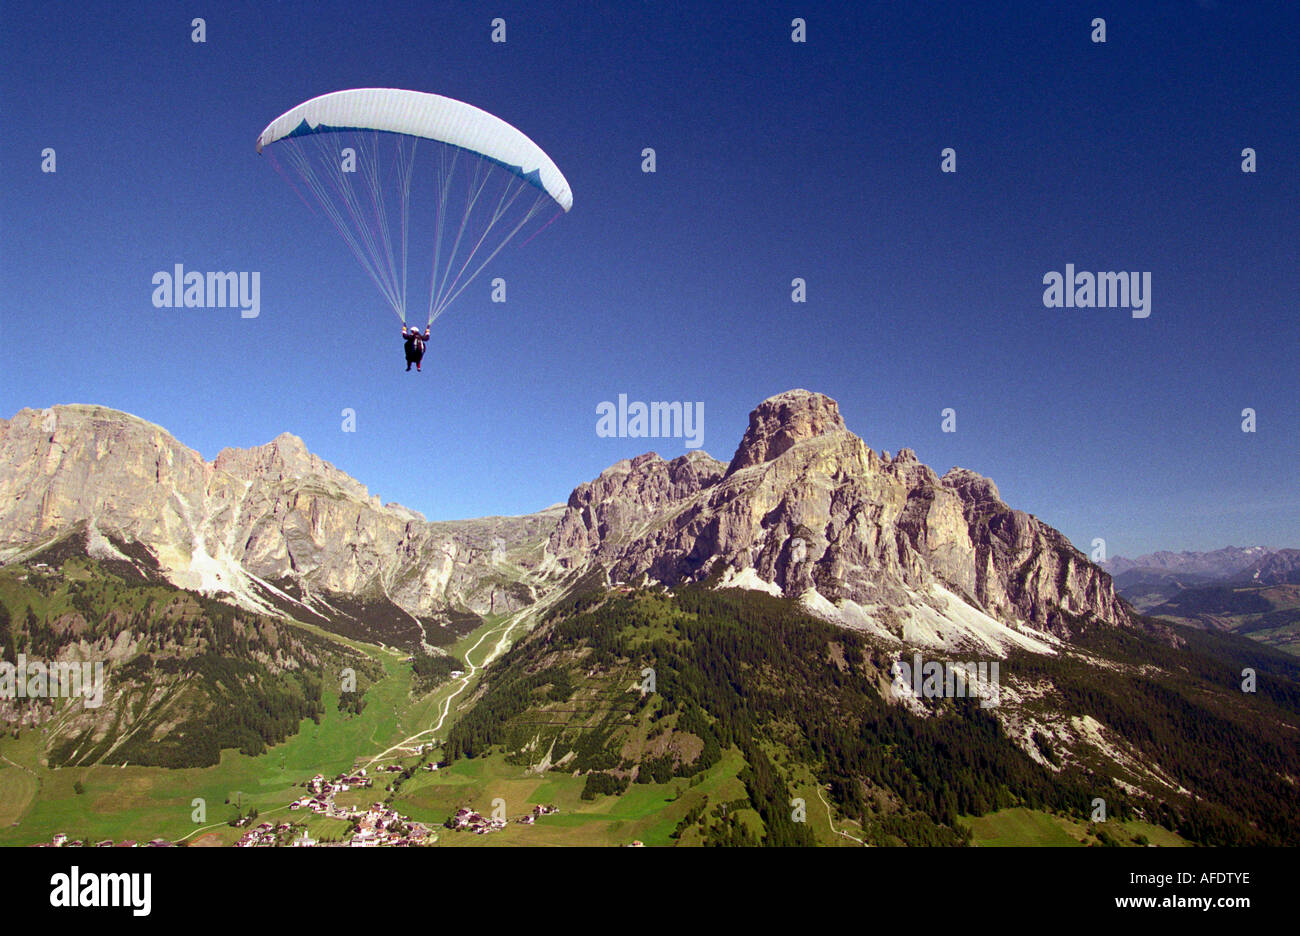 Paragliding over Corvara, Sassongher right side, Dolomites, Alta Badia South Tyrol. Italy Stock Photo